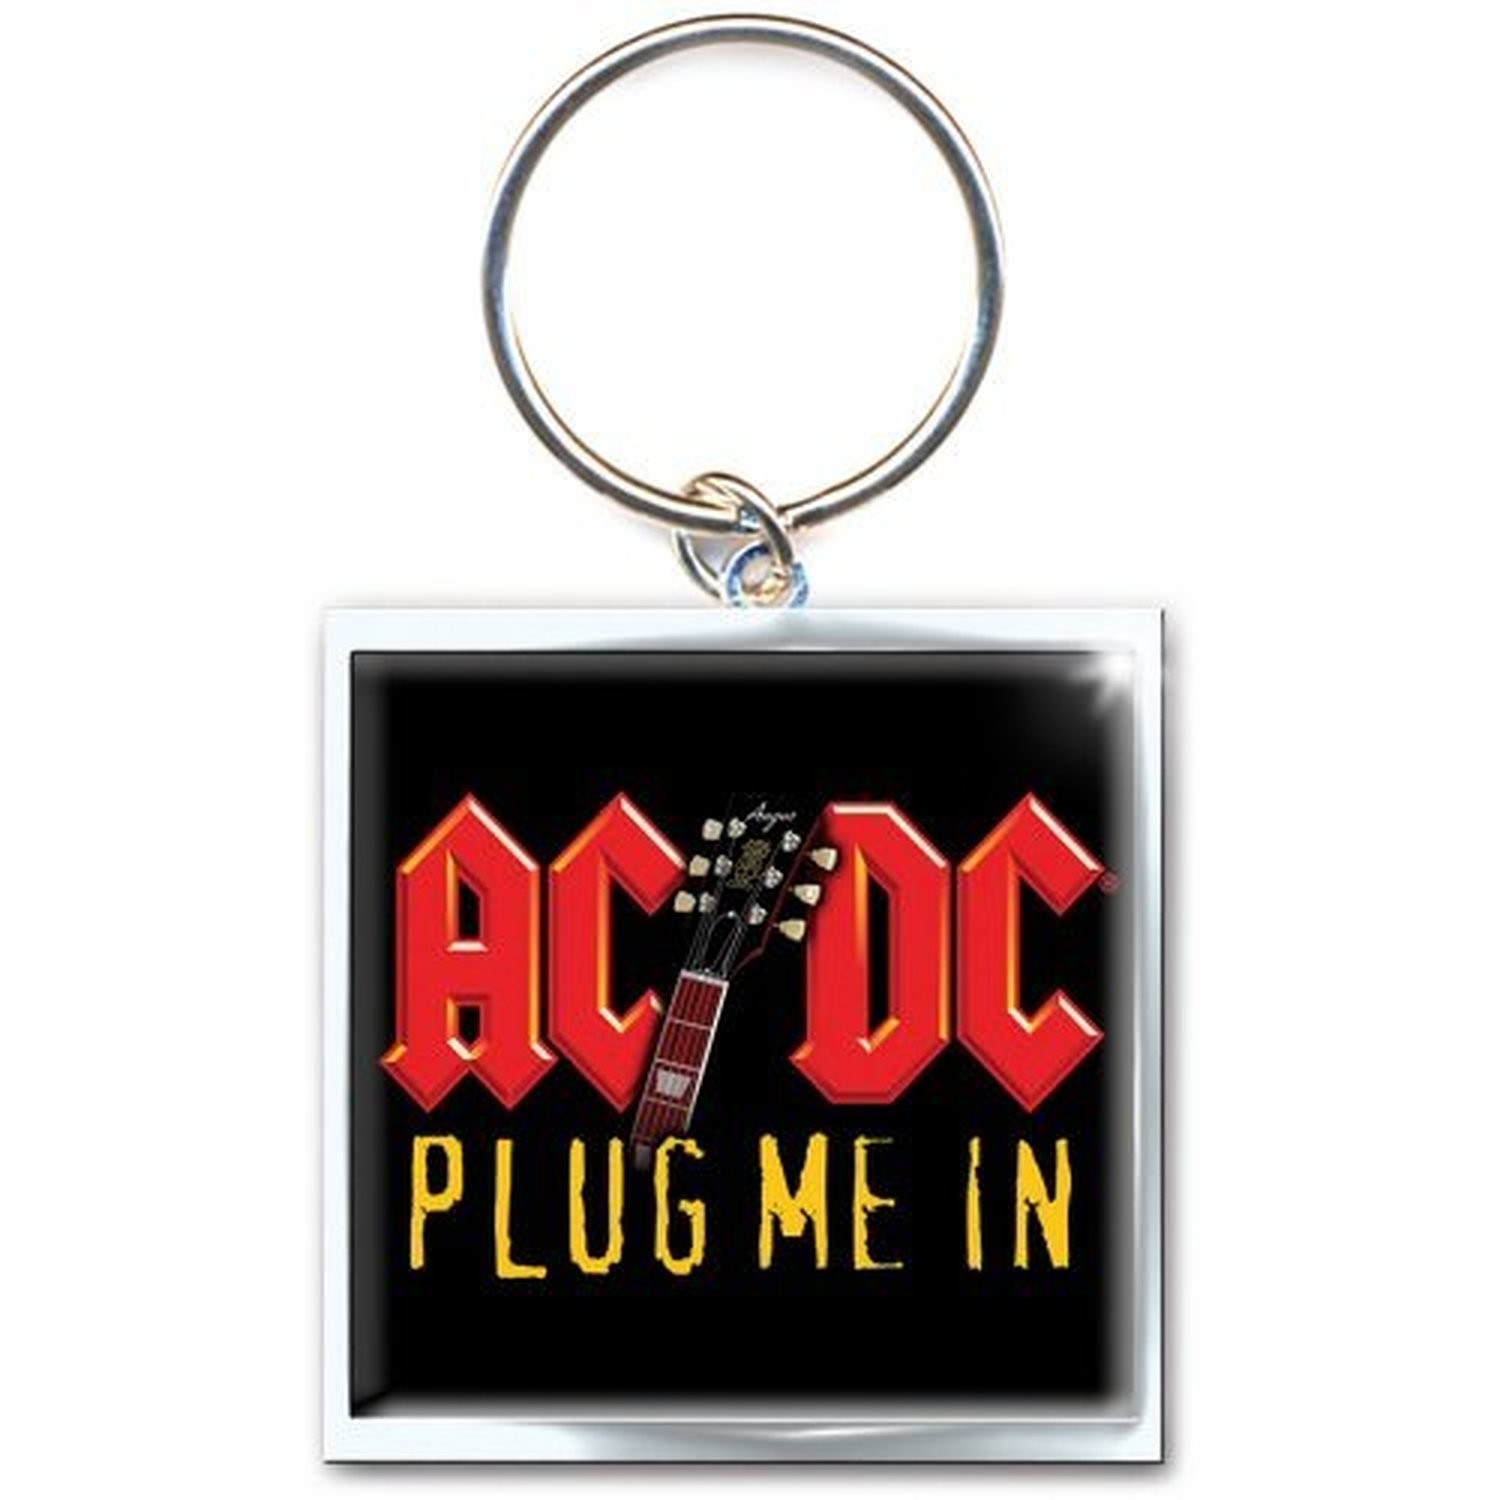 AC/DC Plug Me In Band Logo Square Black Metal Keychain Keyring Fan Gift Official